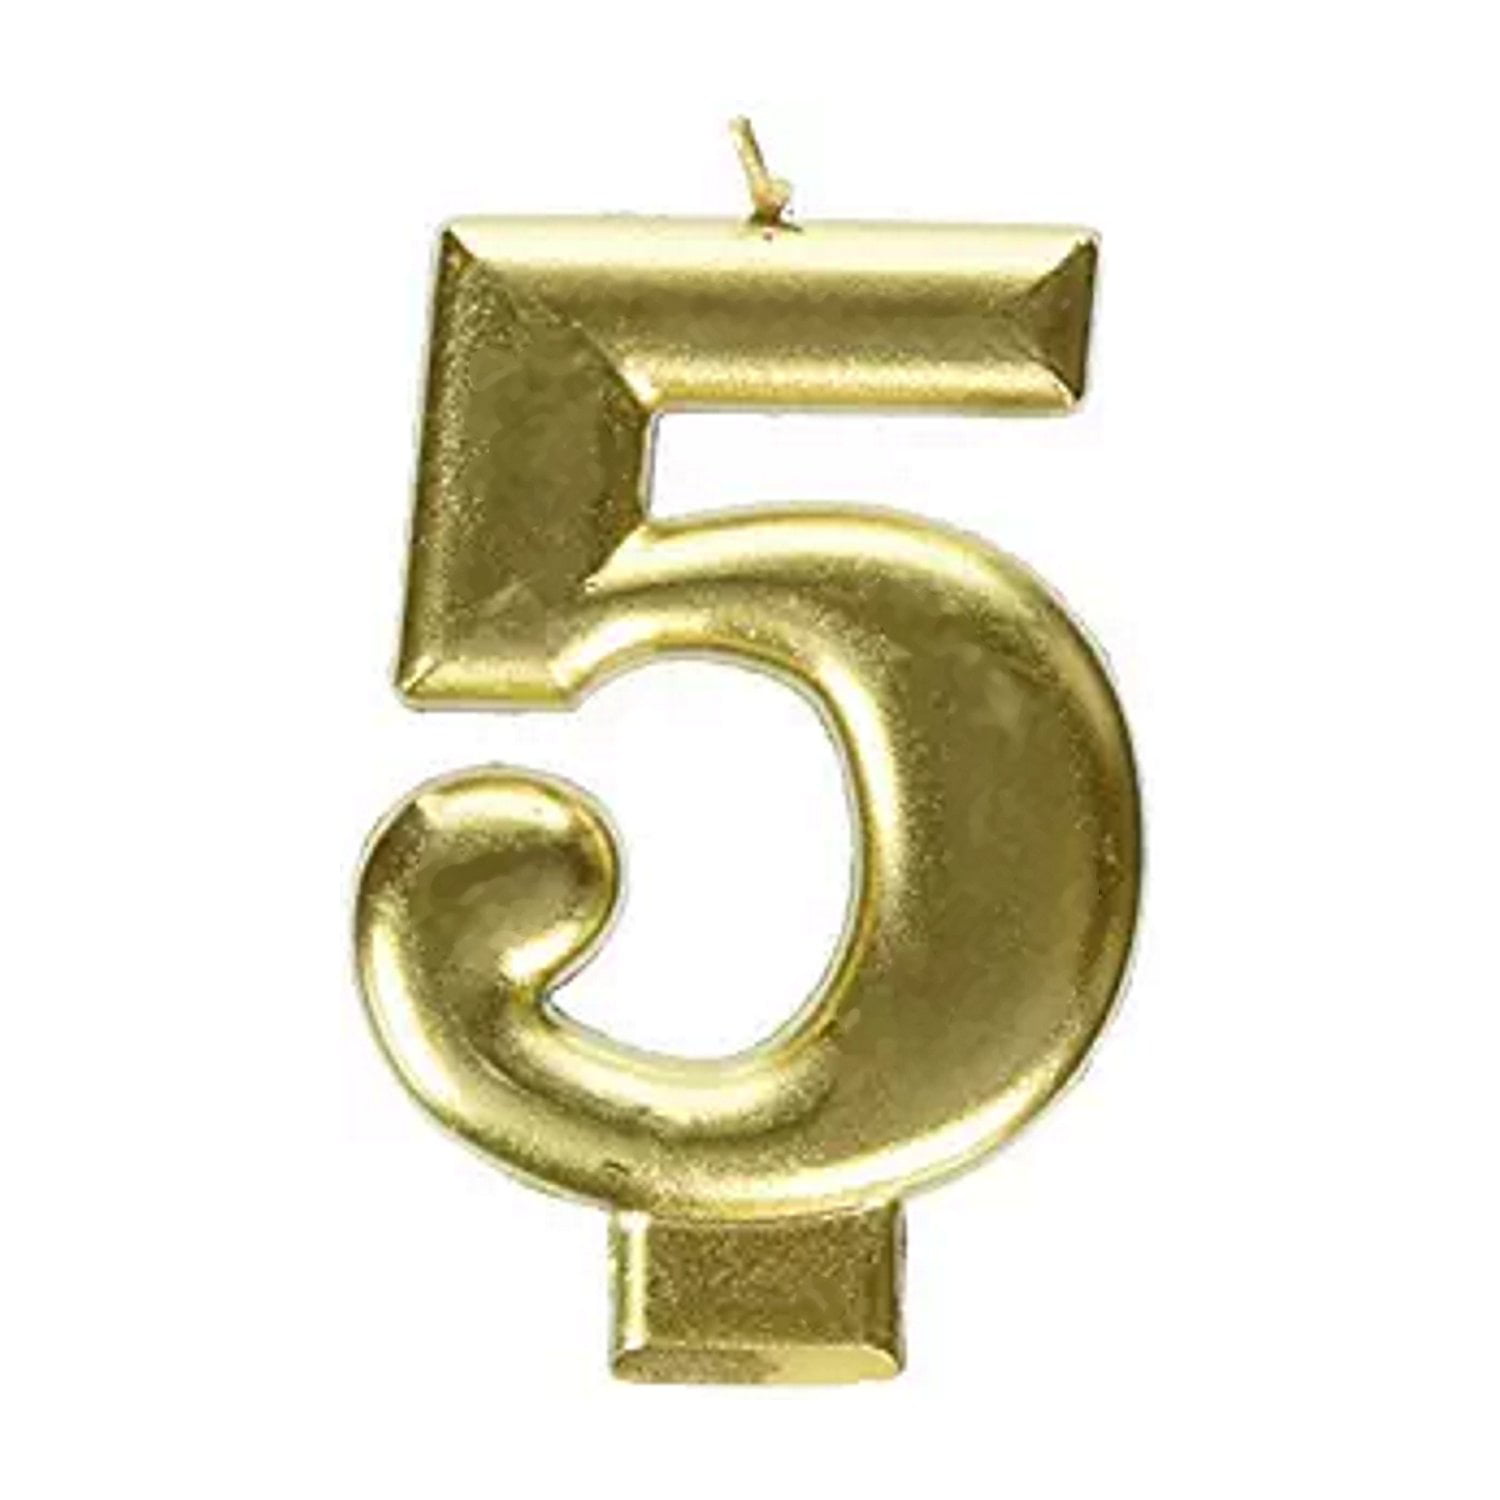 5 Unique Events Birthday Celebration Numeral #5 Gold Glitter Candle 3 Party Supplies,Gold